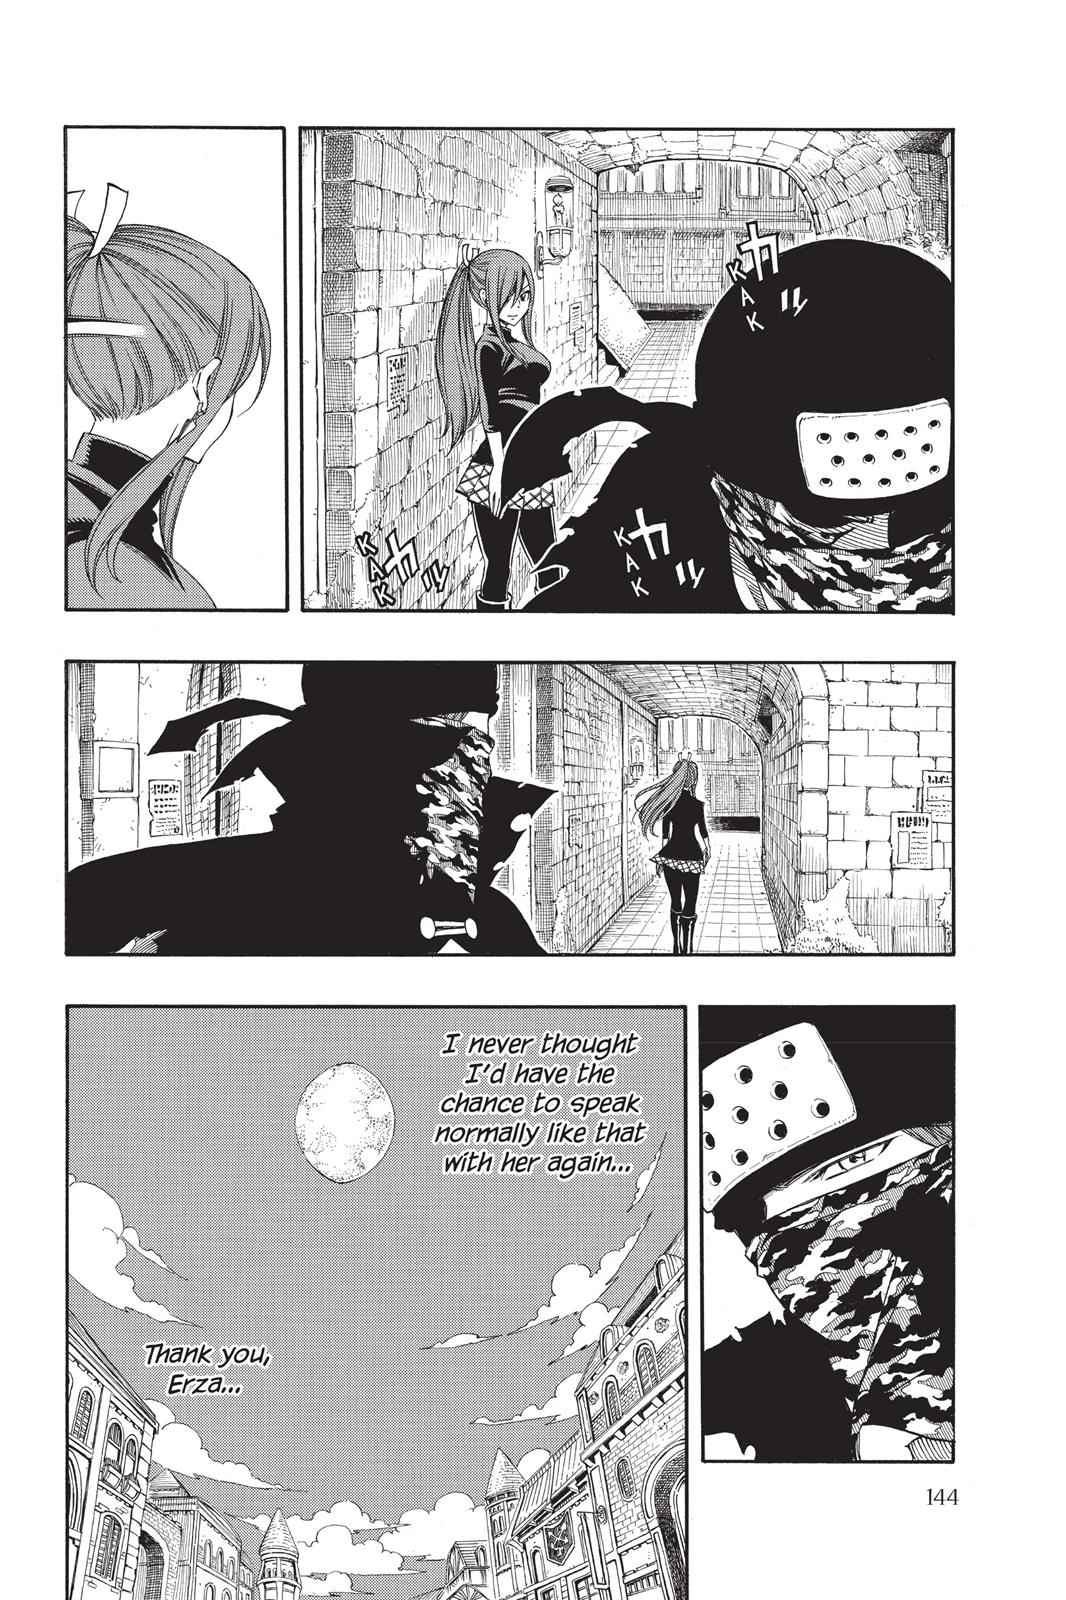  Chapter 281 image 004